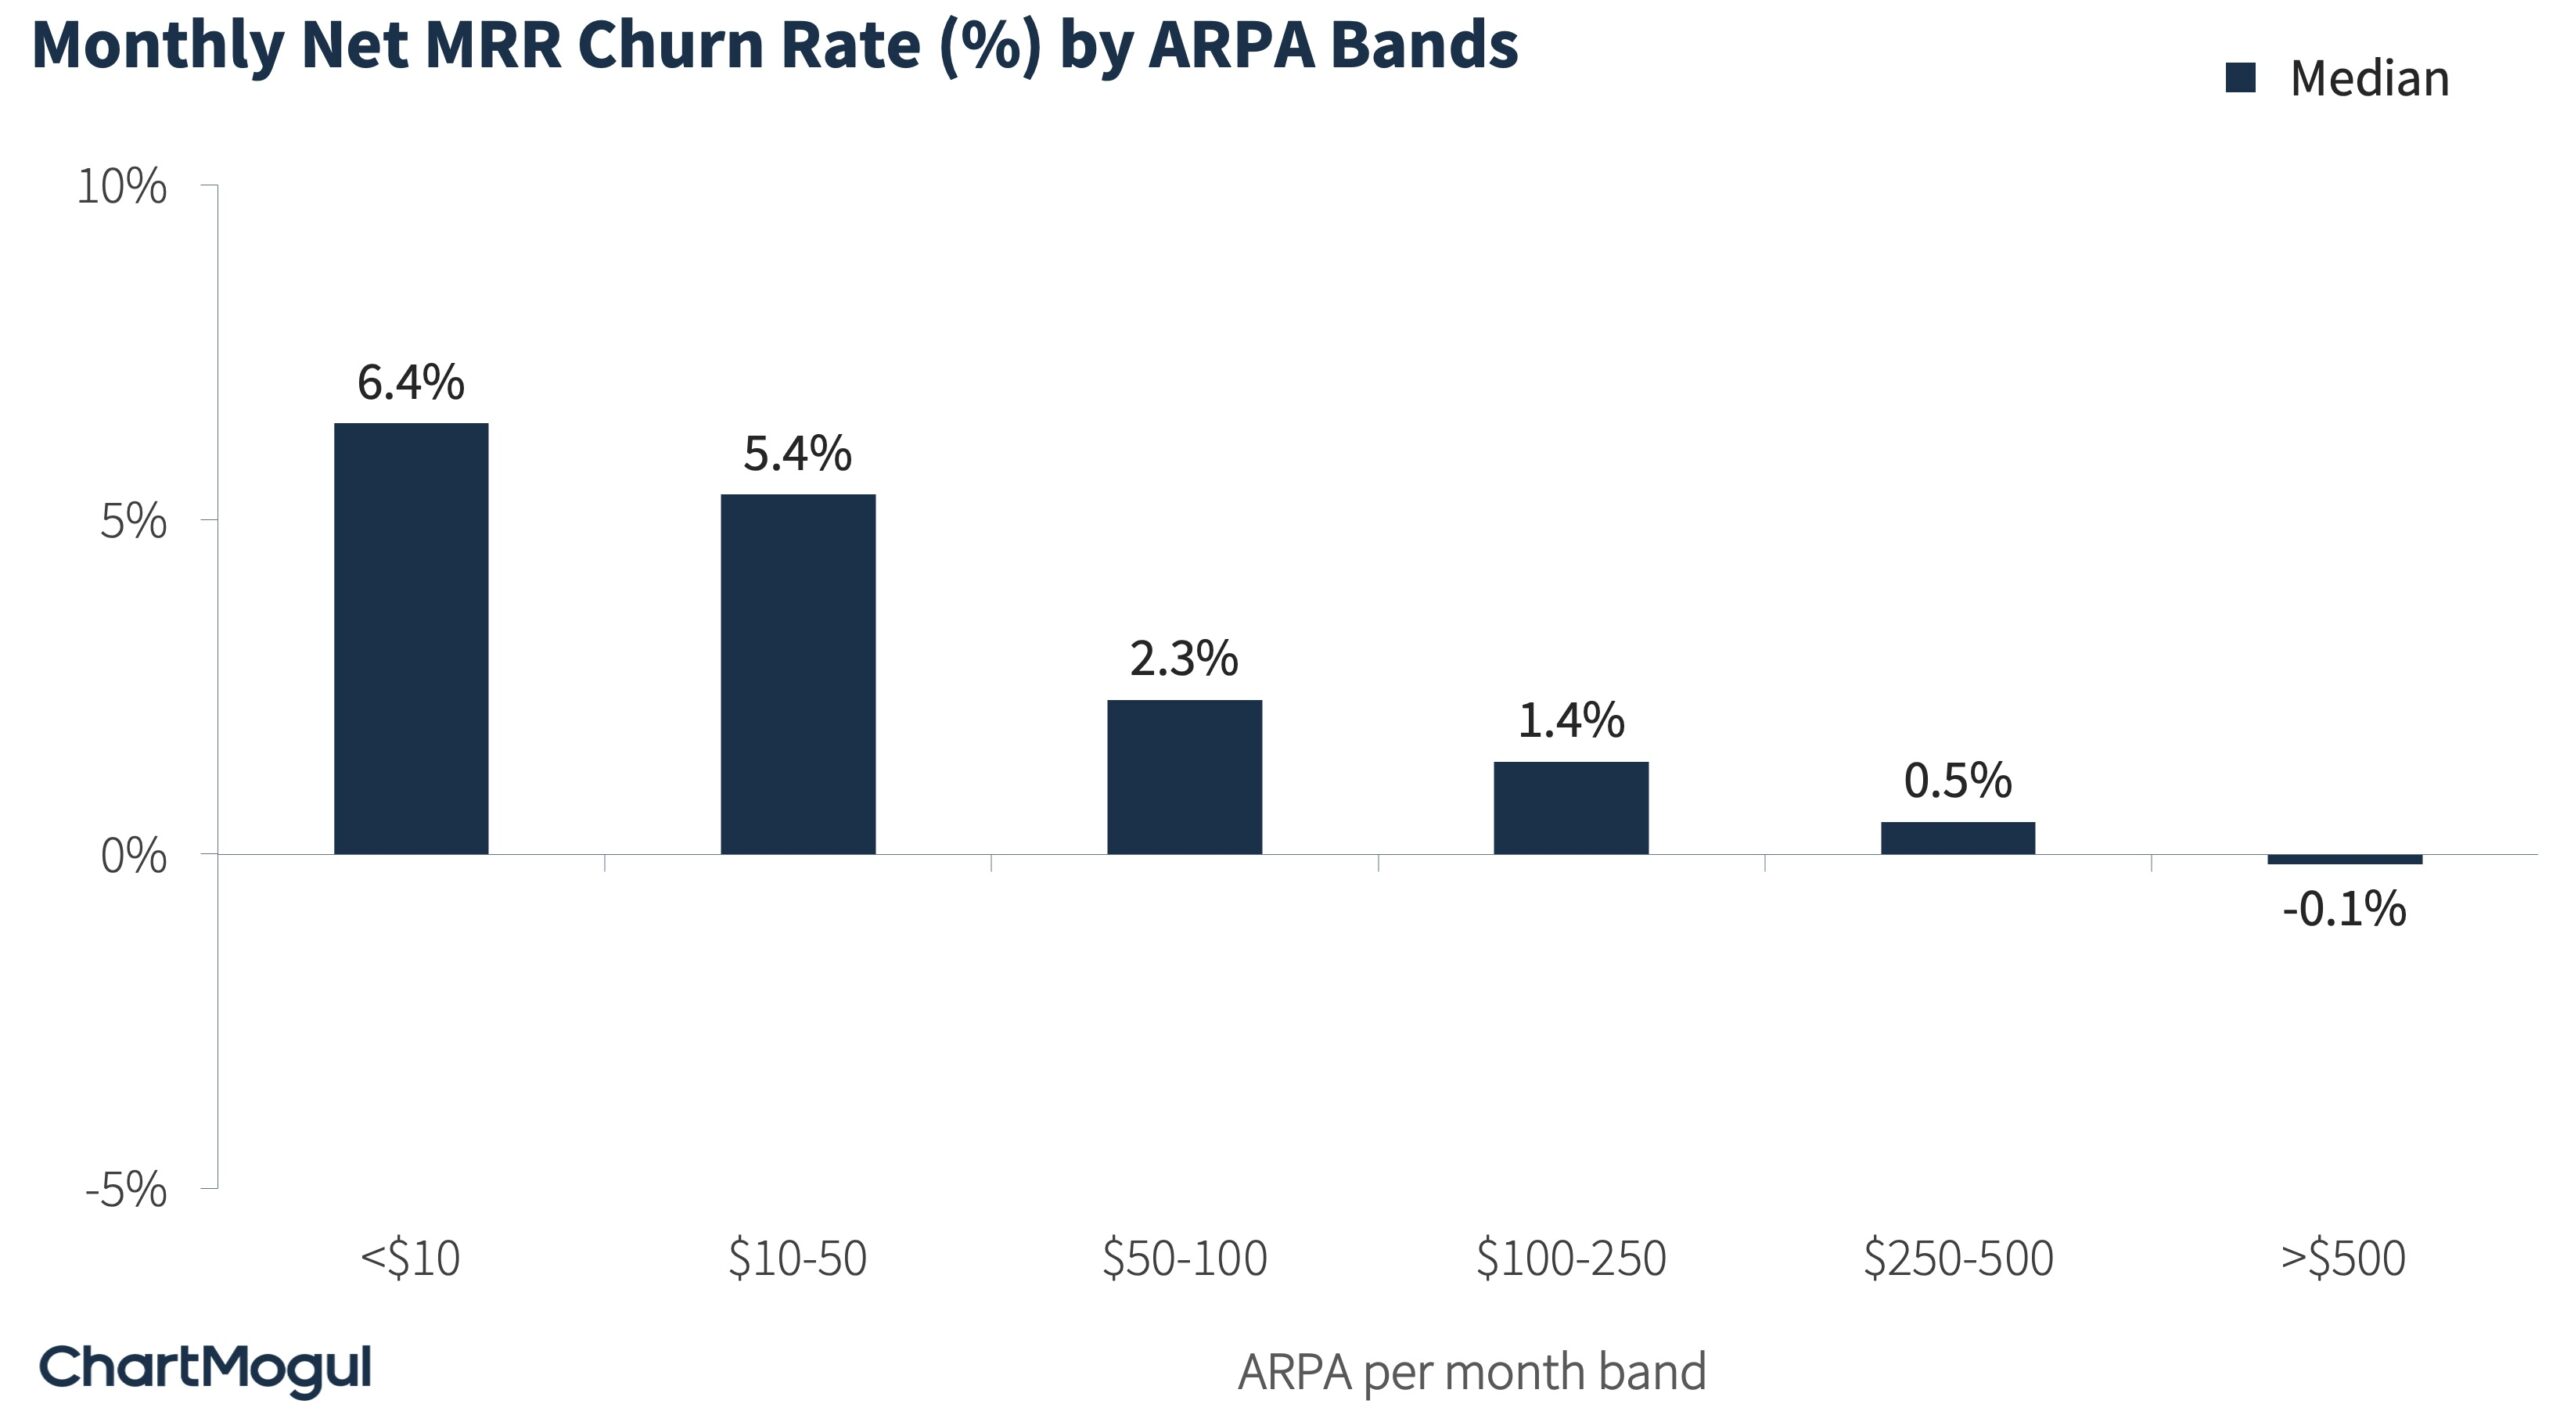 Median Monthly Net MRR Churn Rate by ARPA Bands